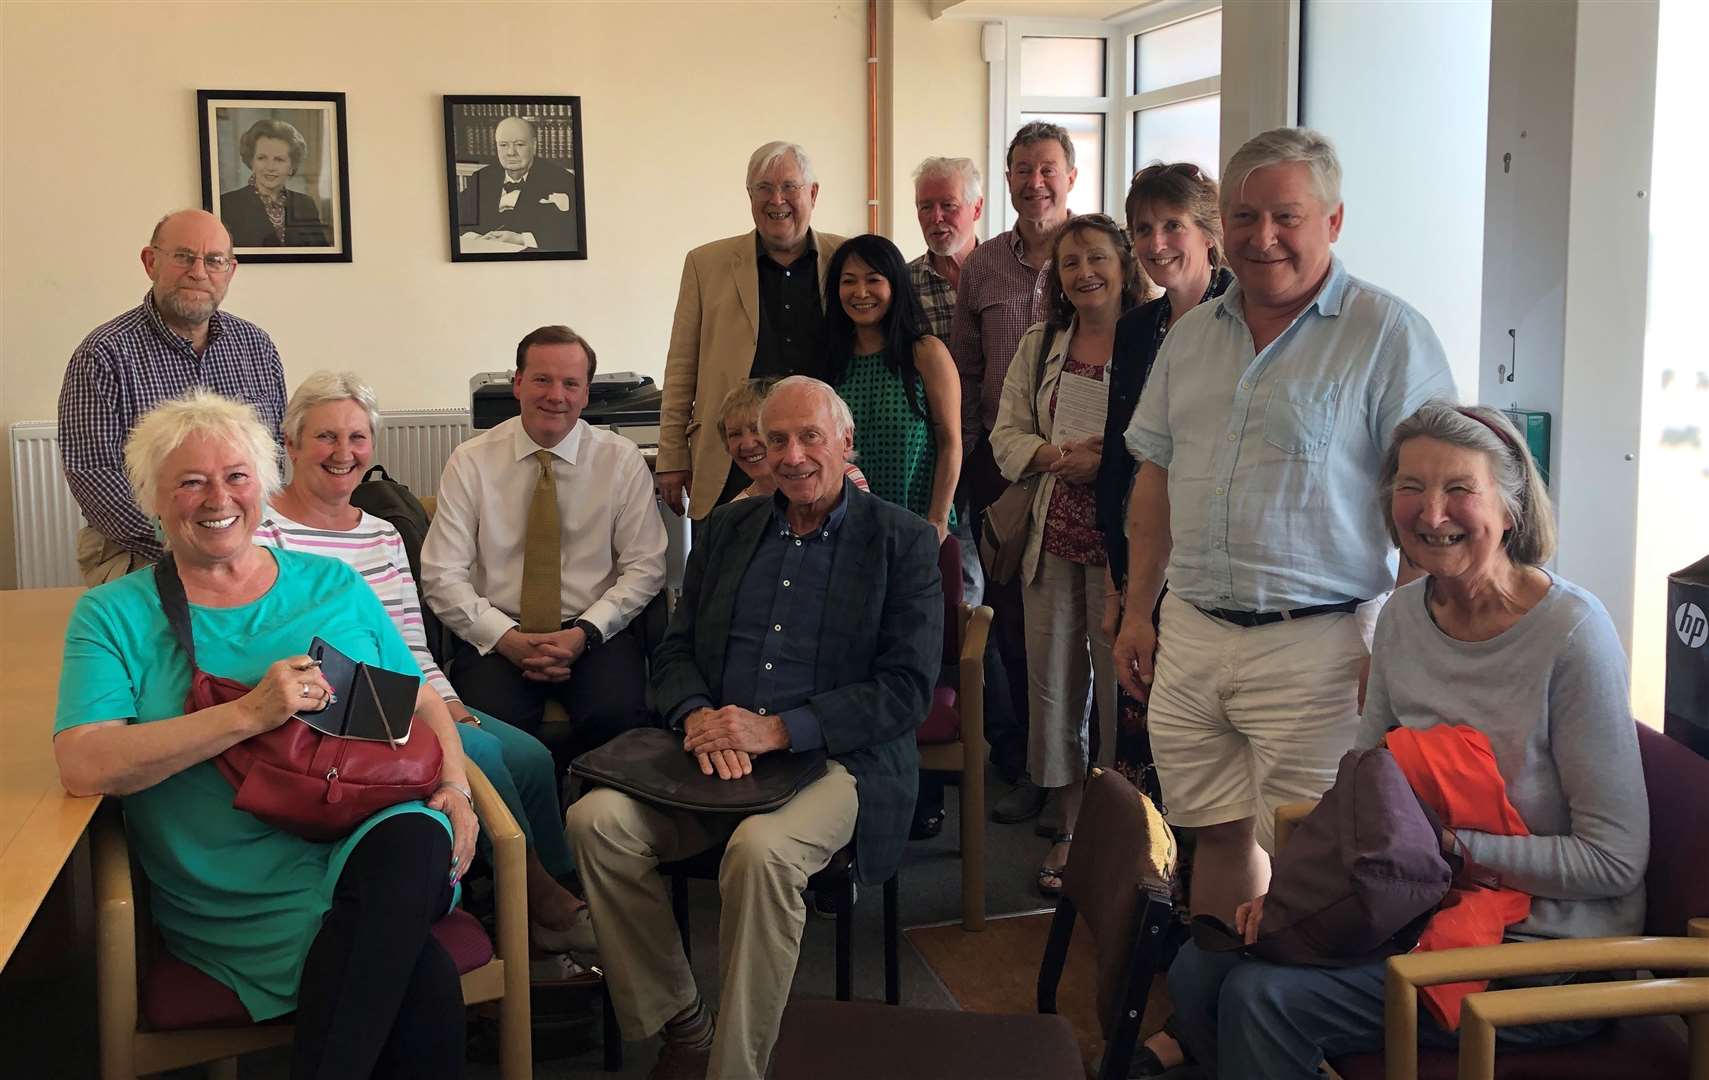 MP Charlie Elphicke met with members of Finglesham Fields campaign group who are hosting the meeting